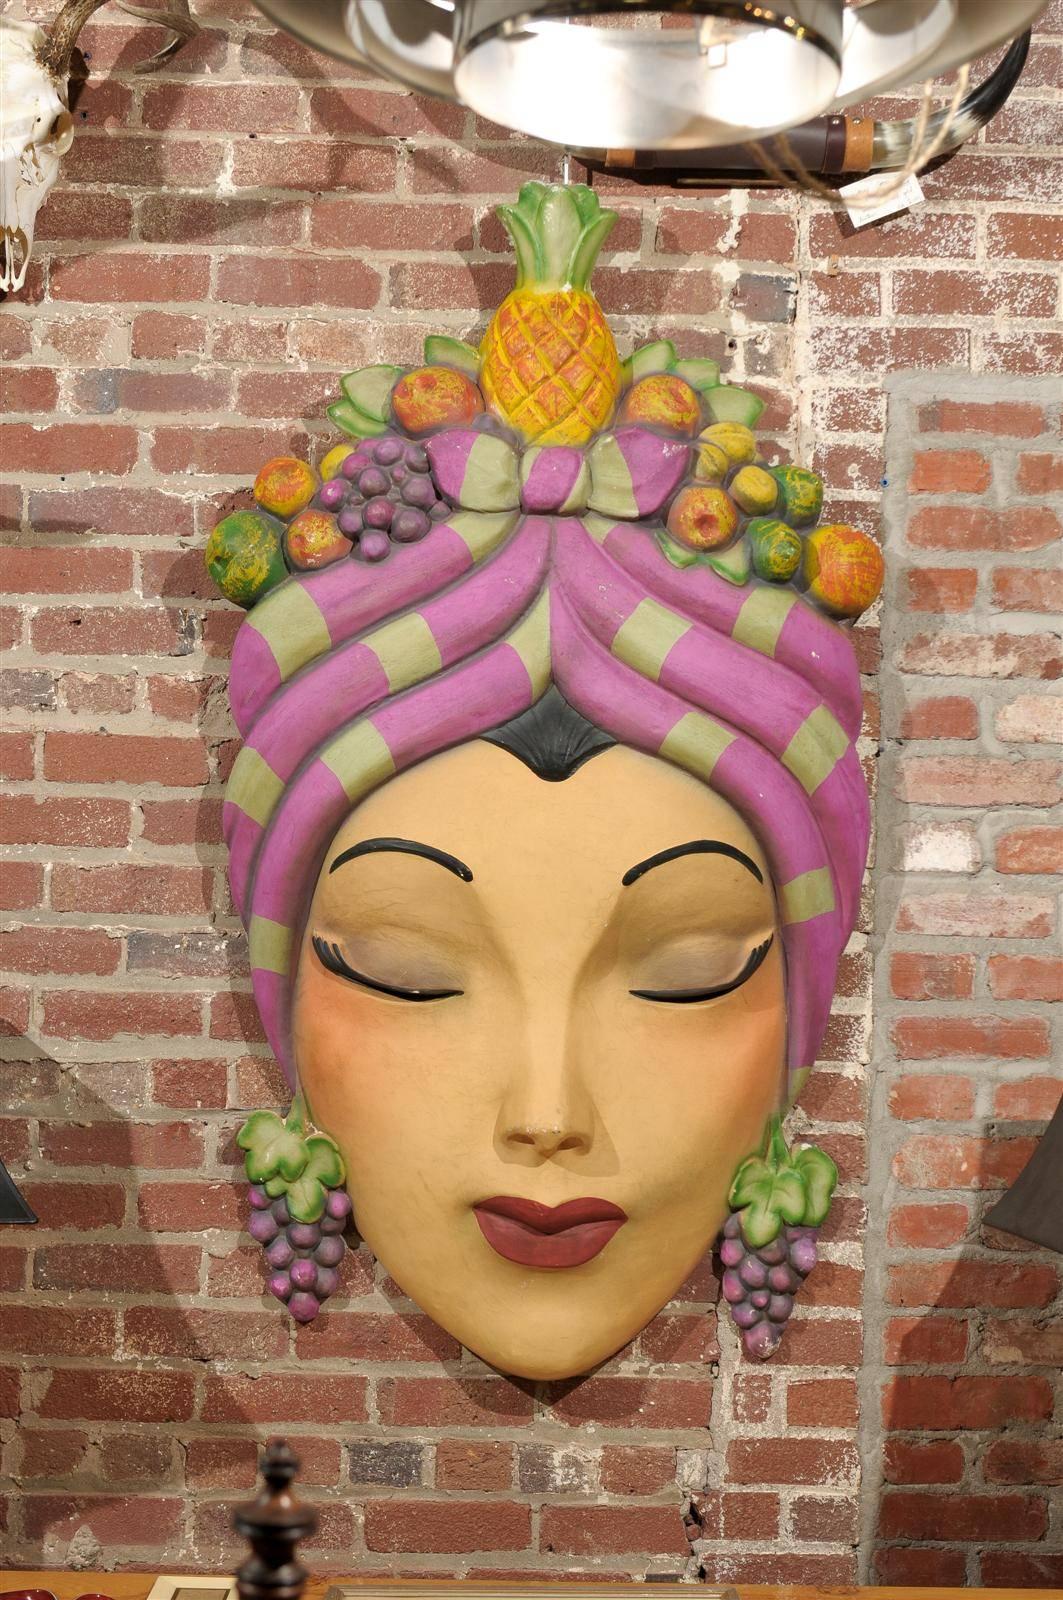 20th century large whimsical fiberglass wall art or retail display, crafted and hand-painted in the spirit of Carmen Miranda.